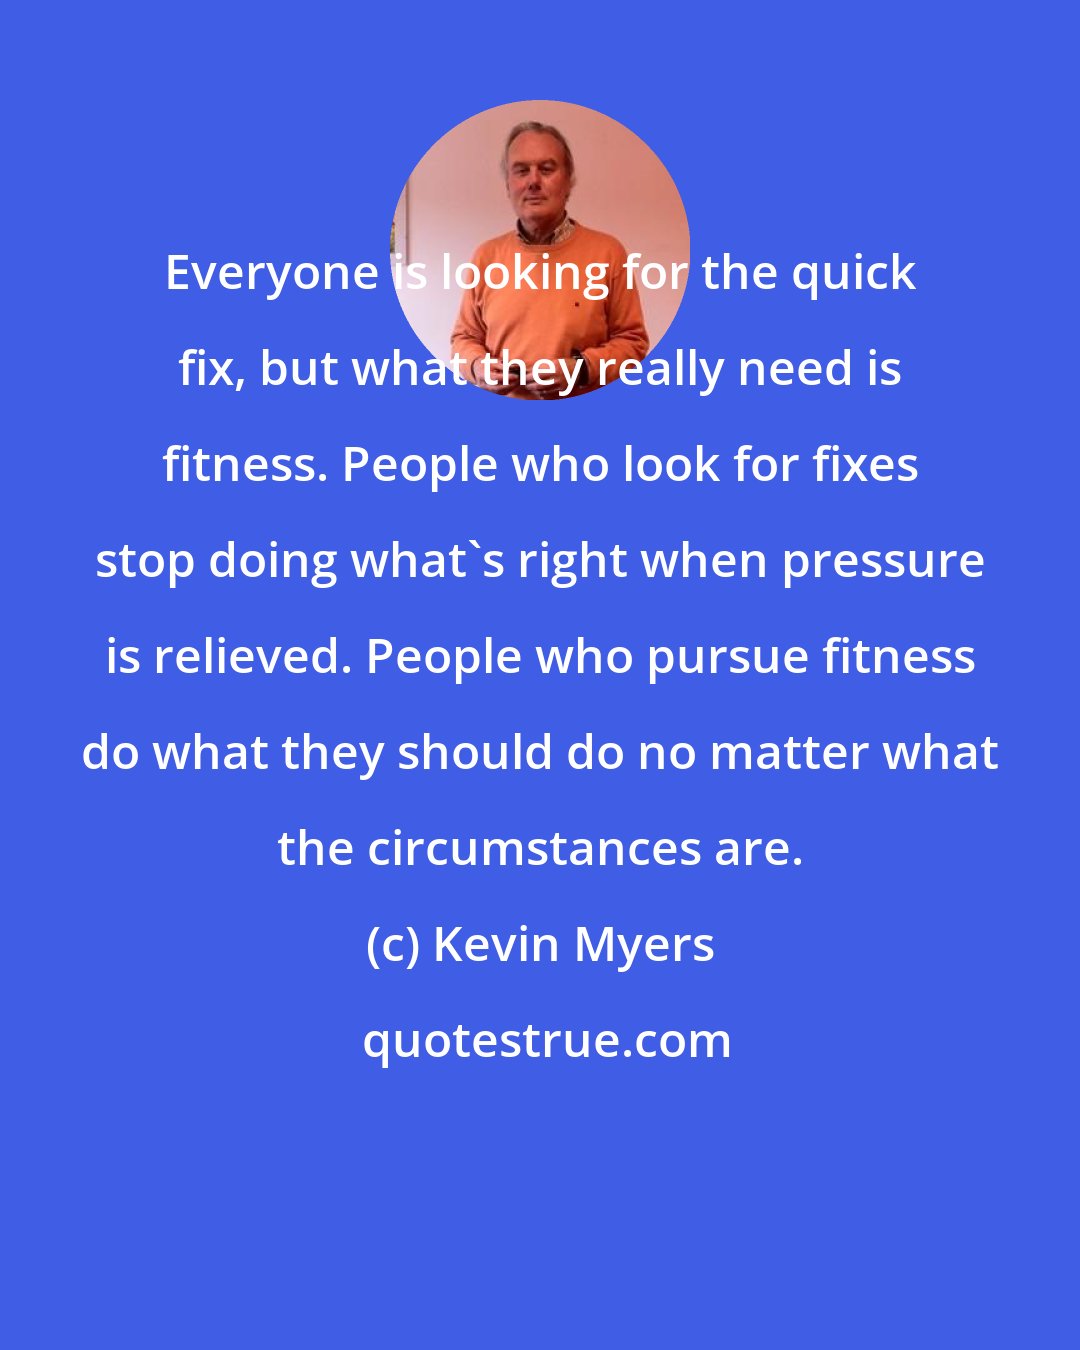 Kevin Myers: Everyone is looking for the quick fix, but what they really need is fitness. People who look for fixes stop doing what's right when pressure is relieved. People who pursue fitness do what they should do no matter what the circumstances are.